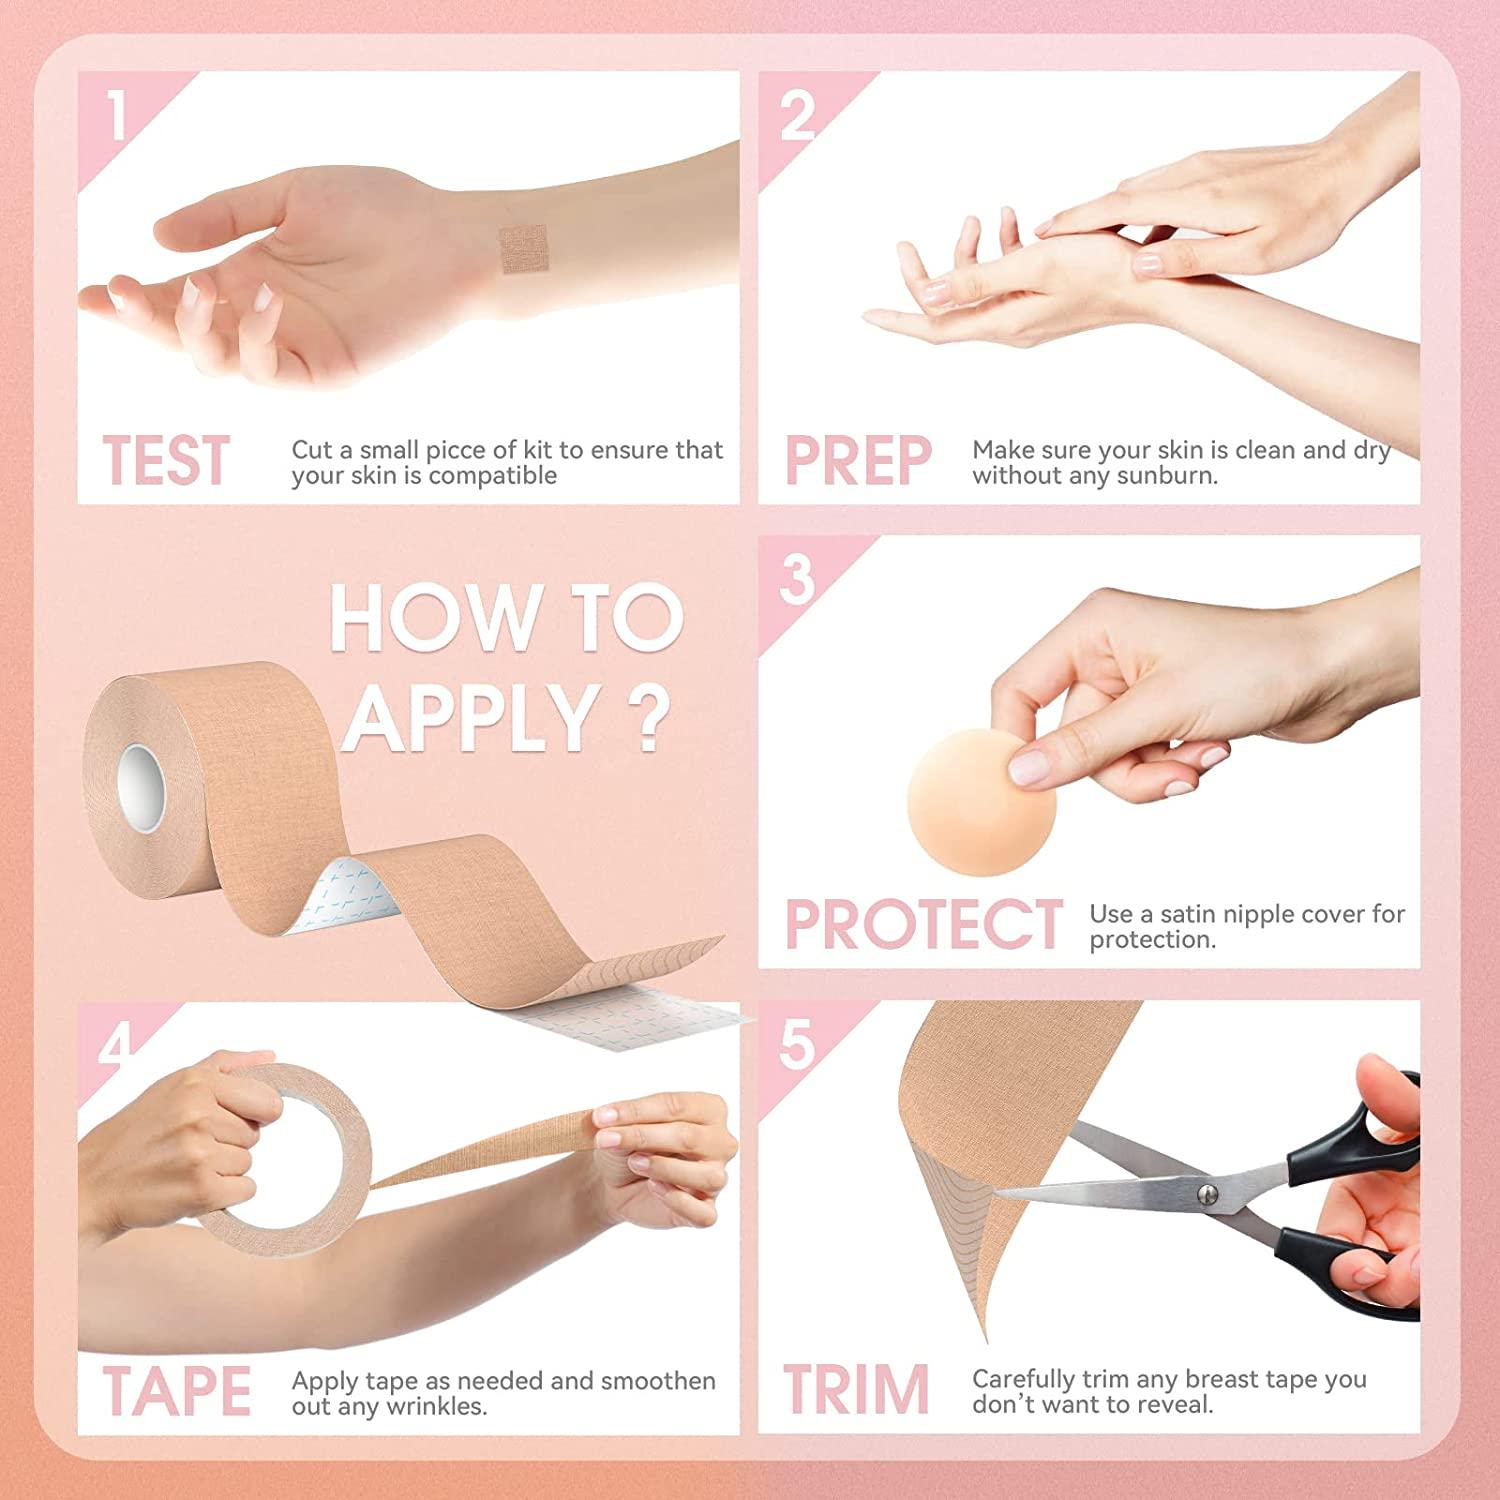 Boob Tape, Breast Lift Tape Strips for Contour Lift & Fashion | Boobytape  Bra Alternative of Breasts | Body Tape for Lift Push up in All Clothing